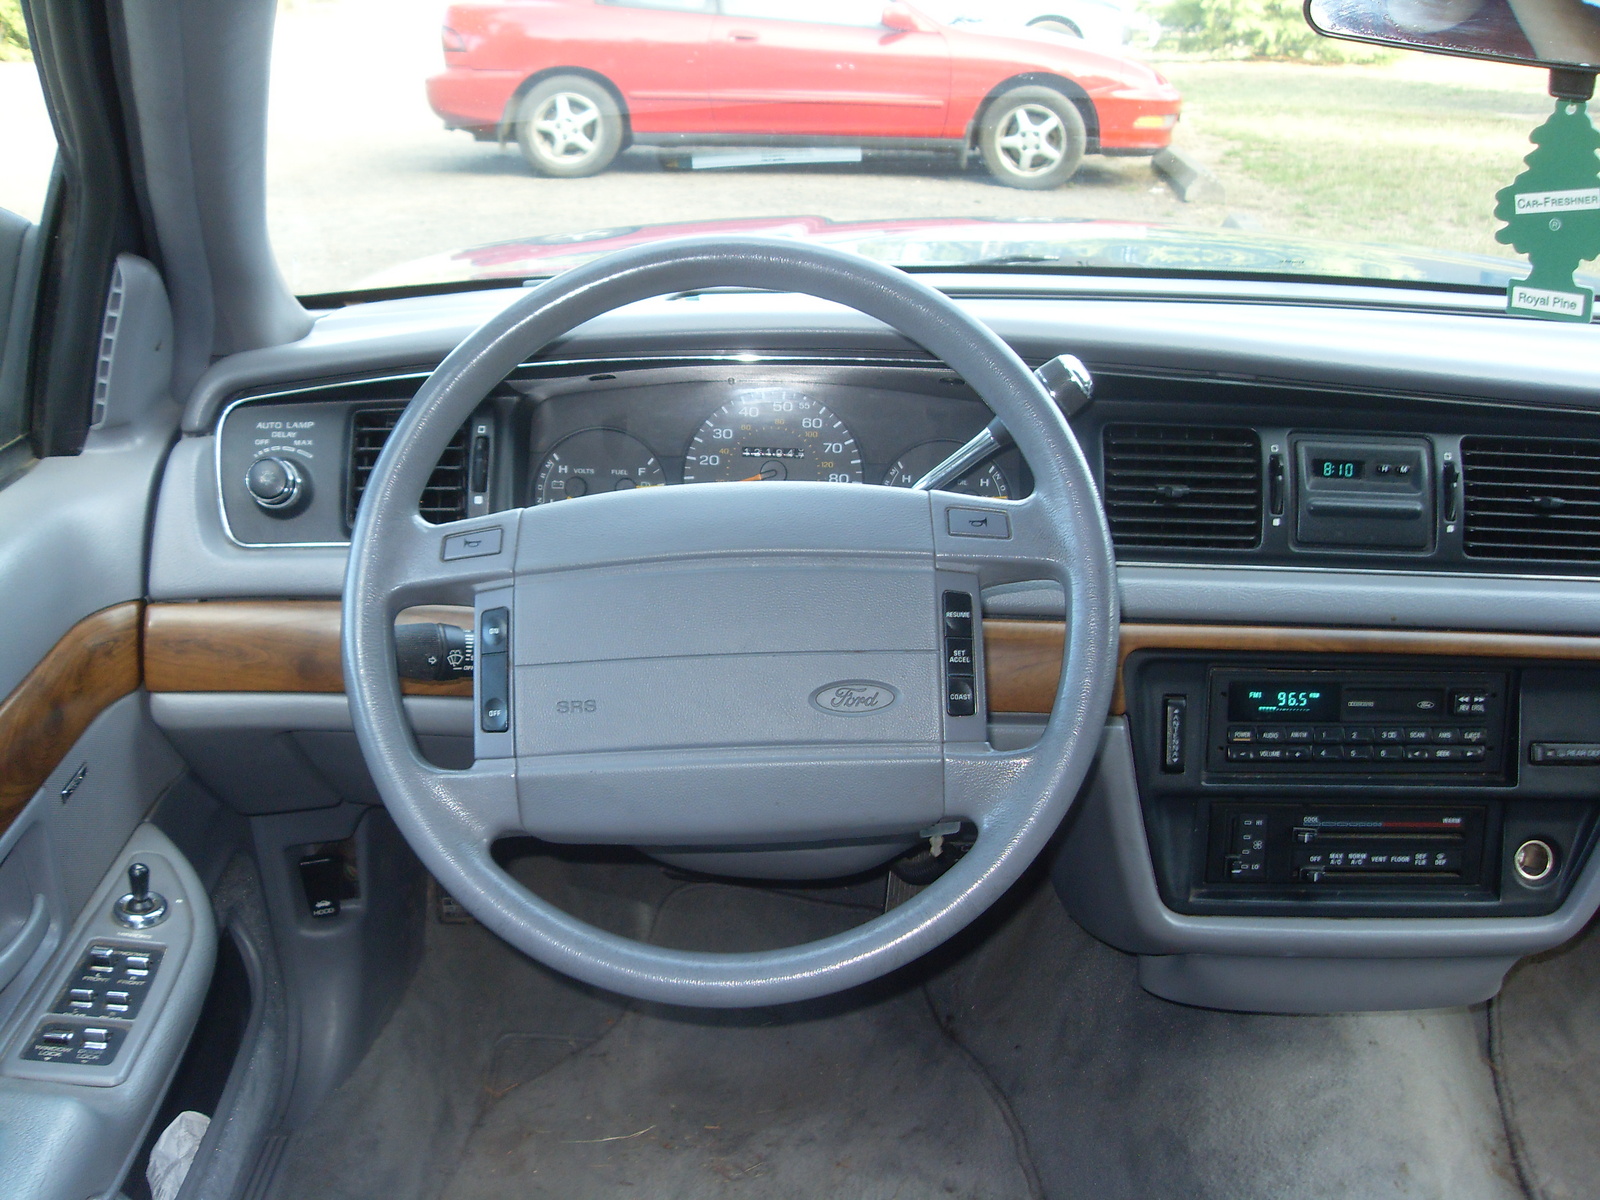 1993 Ford crown victoria specs #4